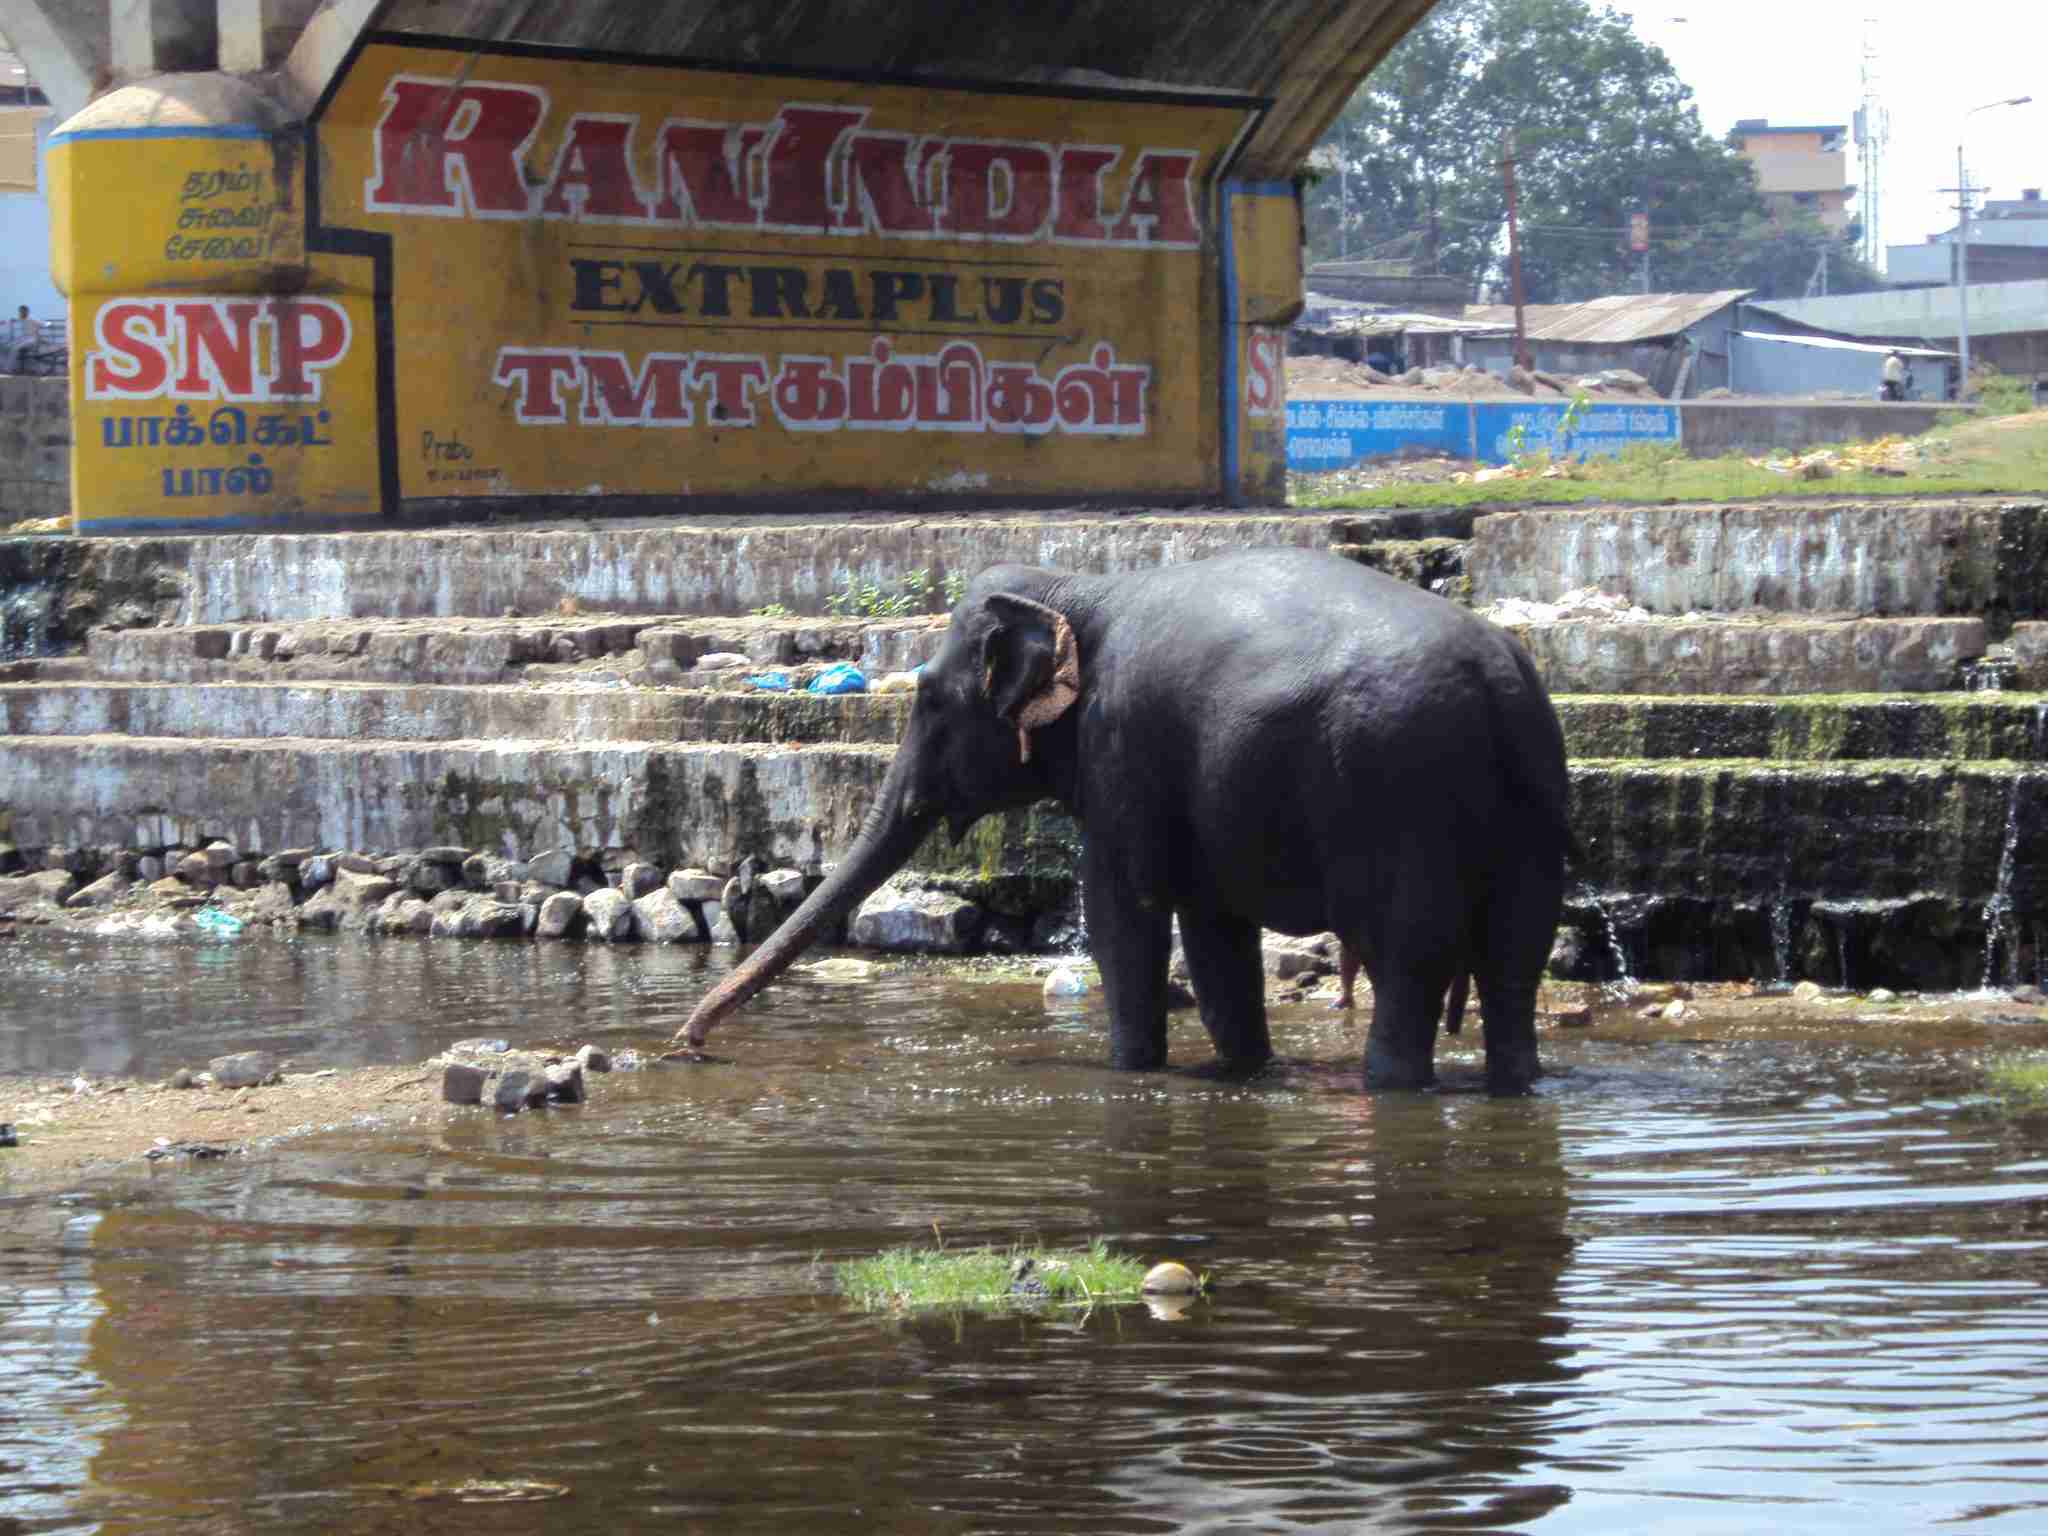 The temple elephant being washed